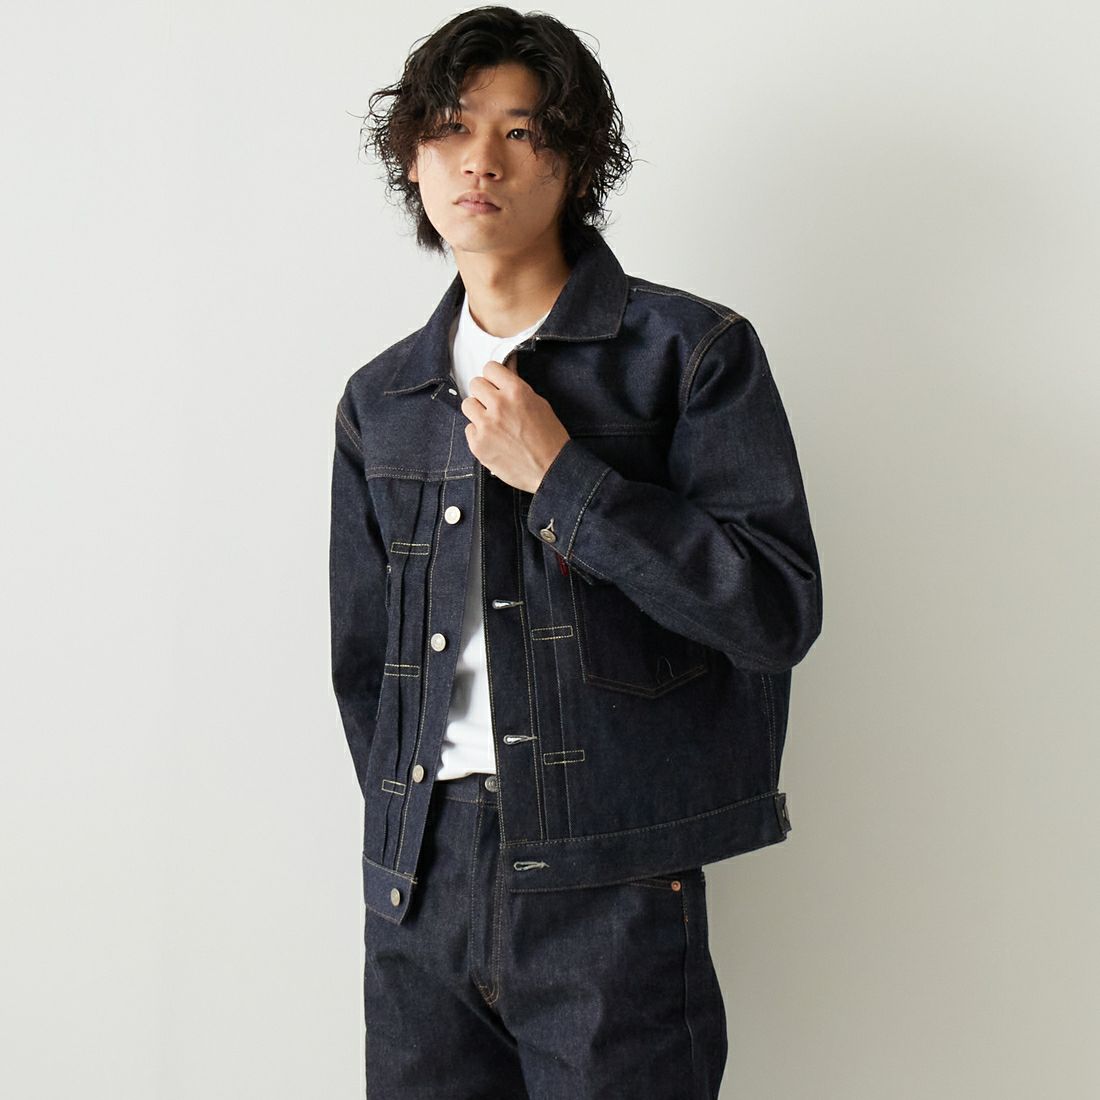 LEVIS Vintage Clothing [リーバイス ヴィンテージ クロージング] 1953